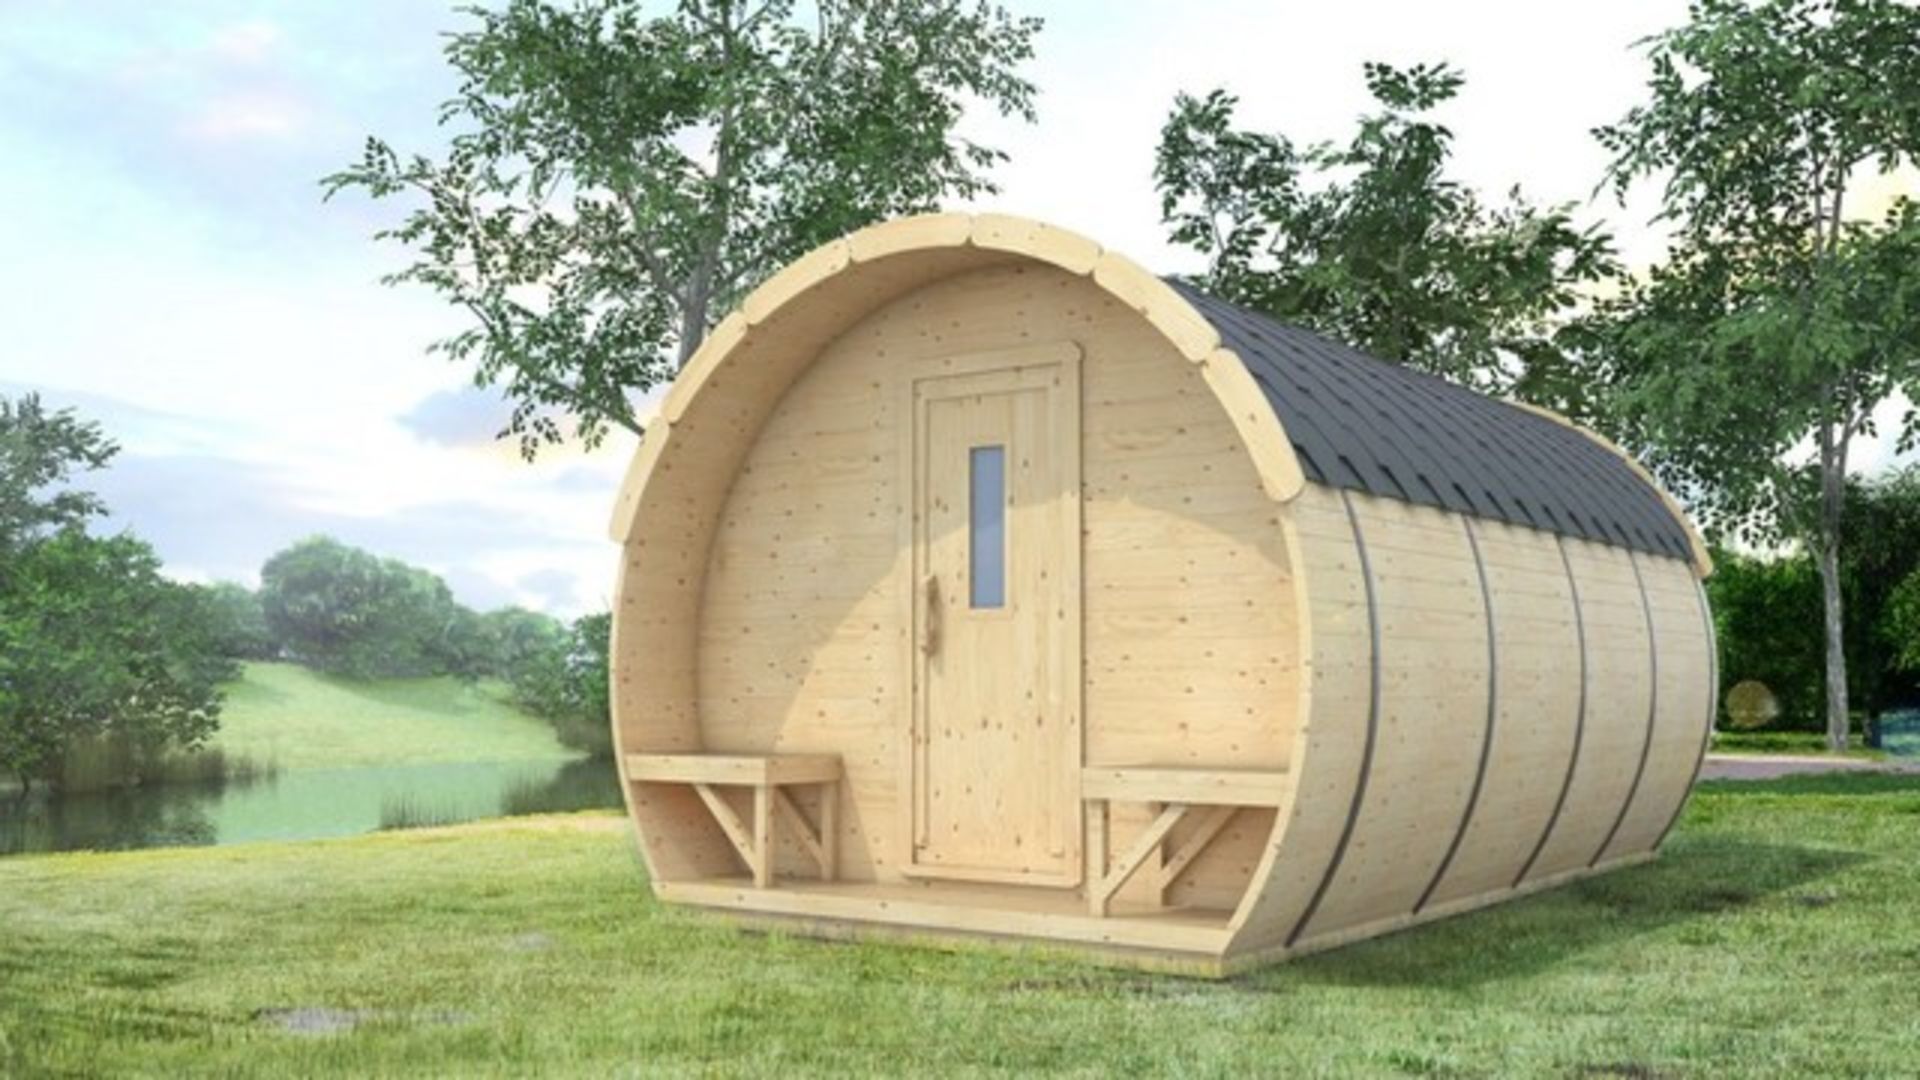 + VAT Brand New 9.5M sq Ice-Viking Barrel- Two Rooms (2x2.3m Sleeping Room and Entrance room with